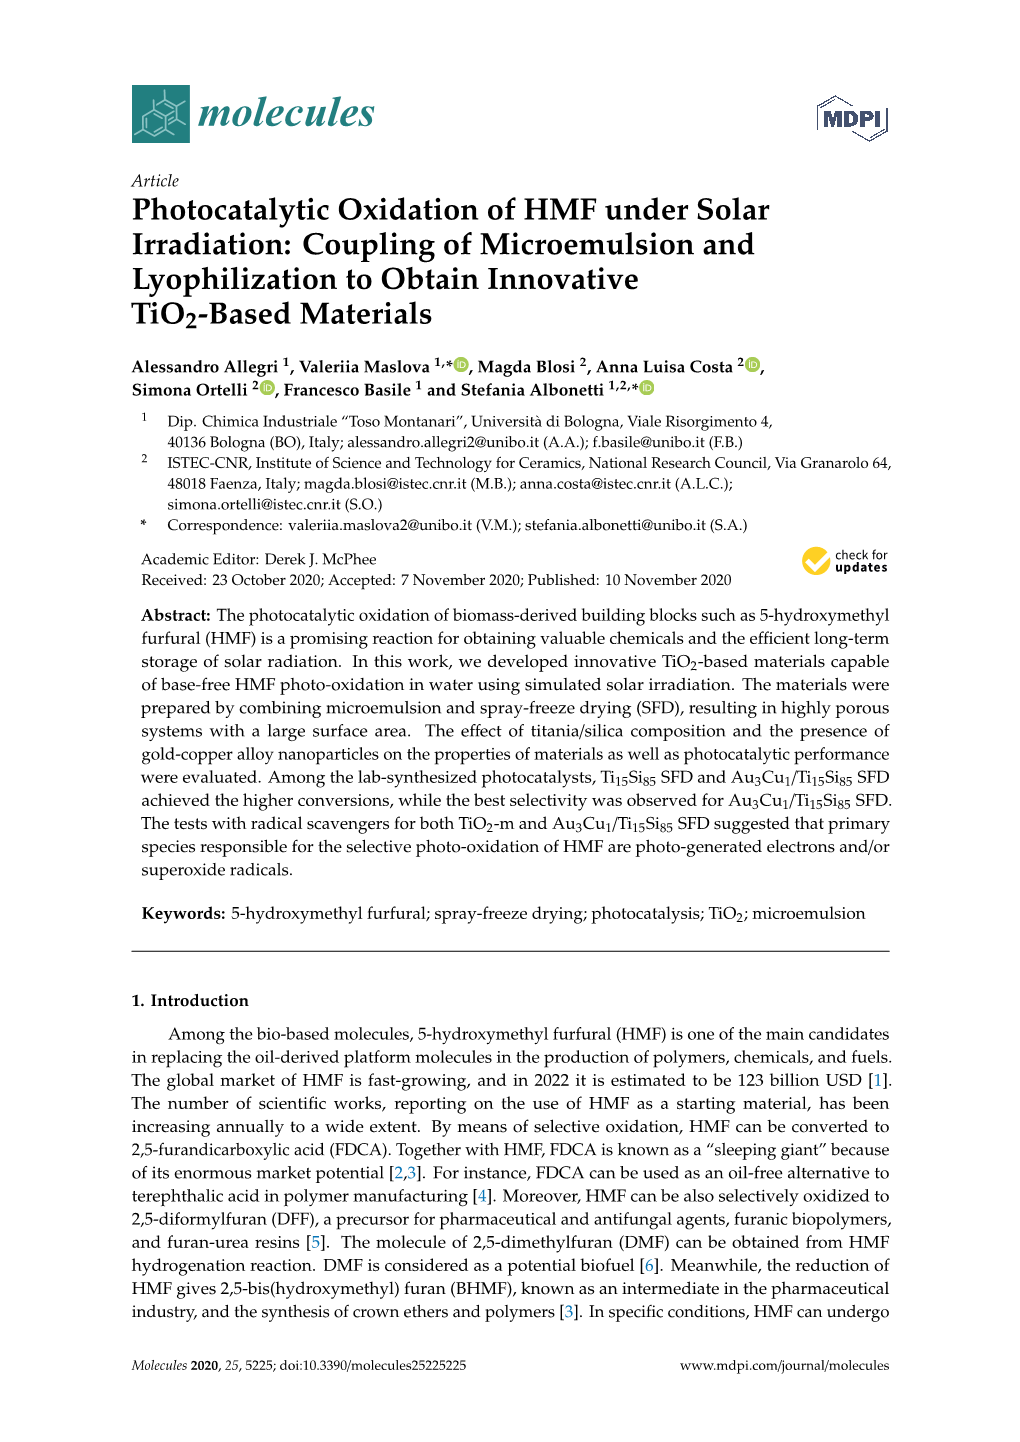 Photocatalytic Oxidation of HMF Under Solar Irradiation: Coupling of Microemulsion and Lyophilization to Obtain Innovative Tio2-Based Materials